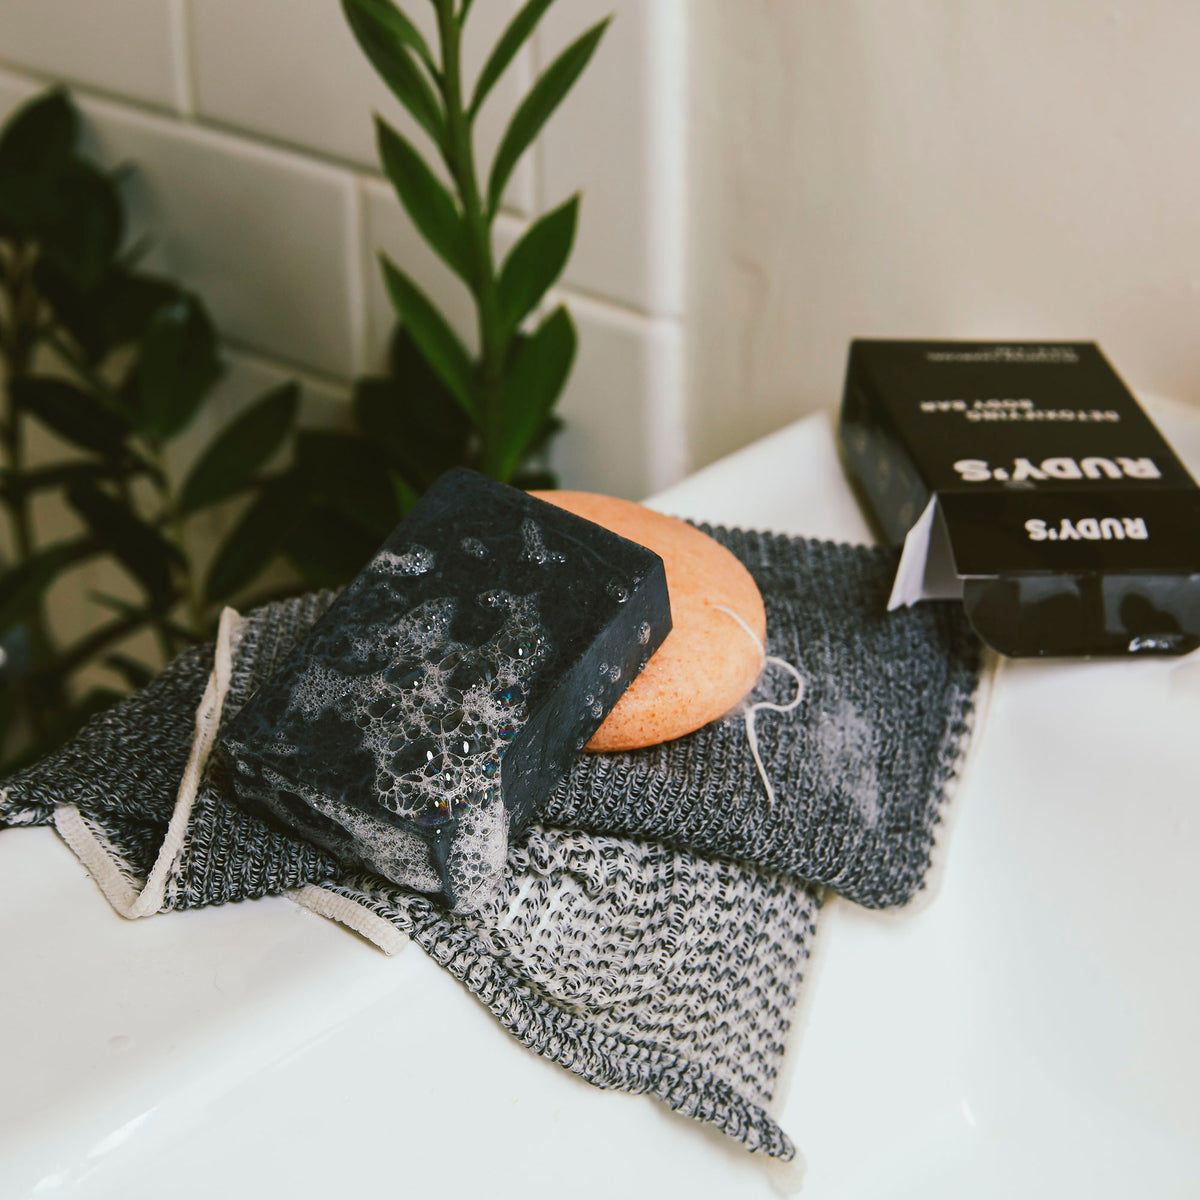 A soapy bar of Rudy's Detoxifying Body Bar with Activated Charcoal